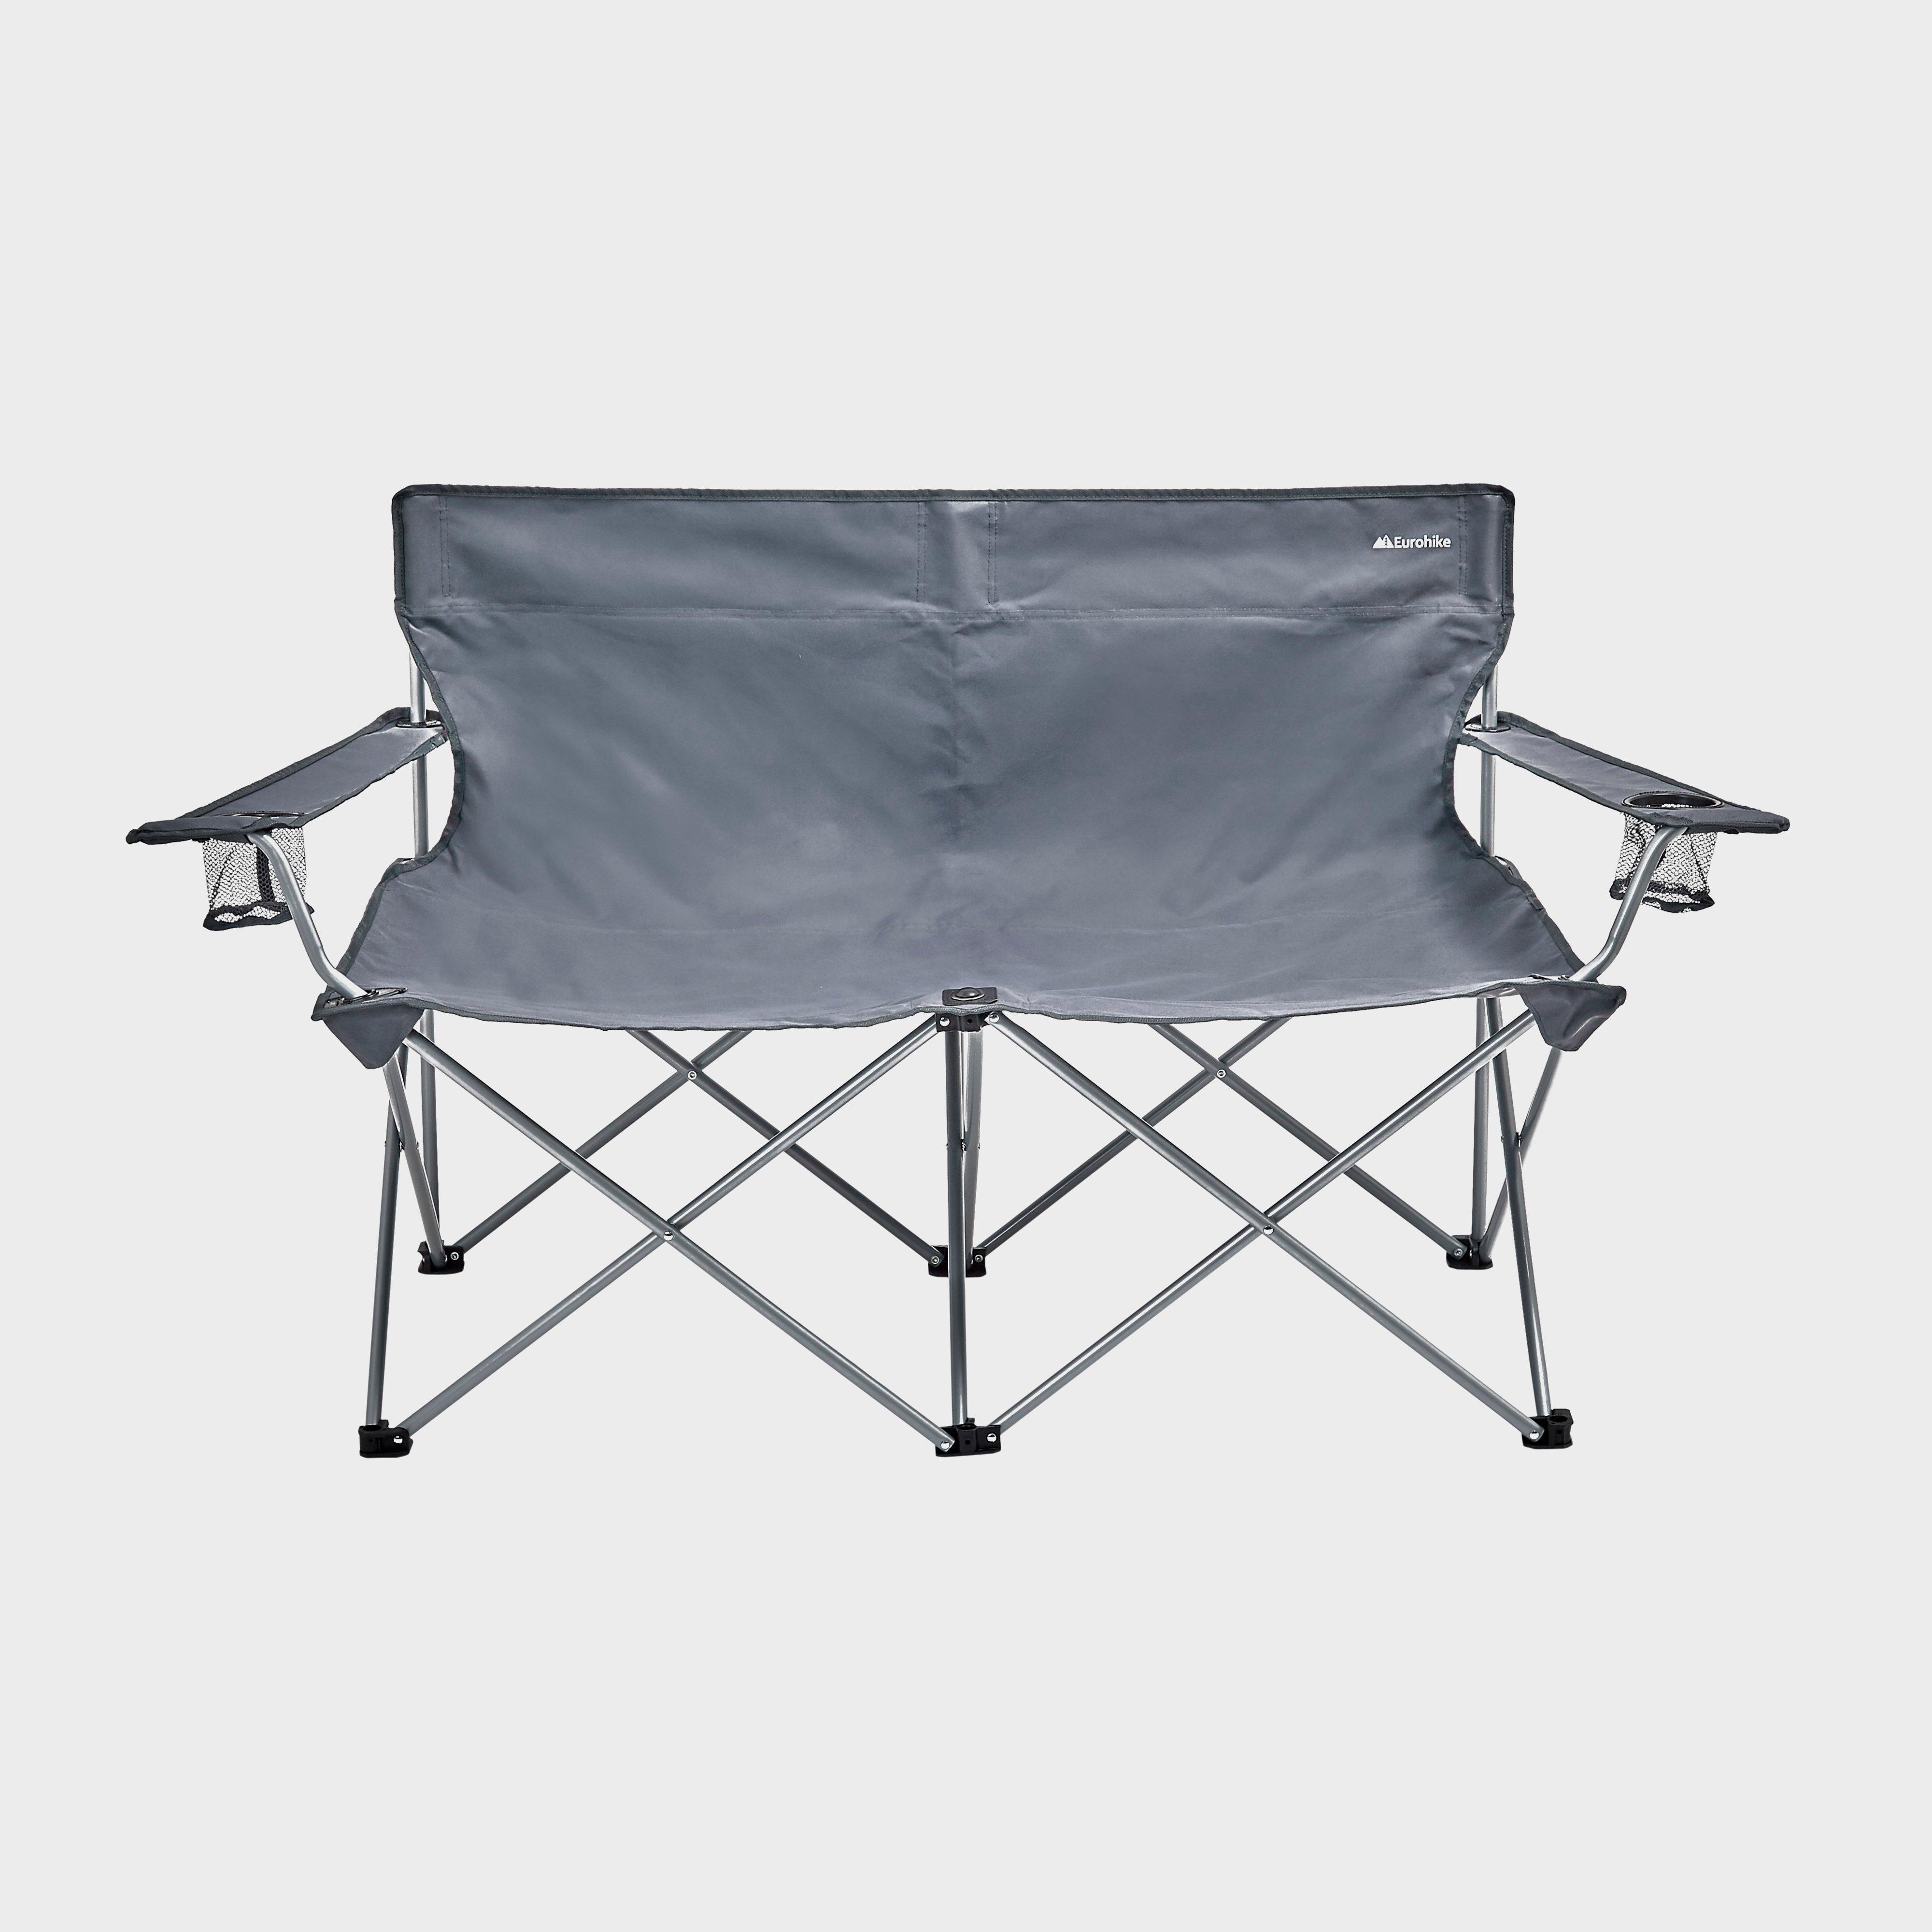 FreedomTrail Nevada Double Chair Review